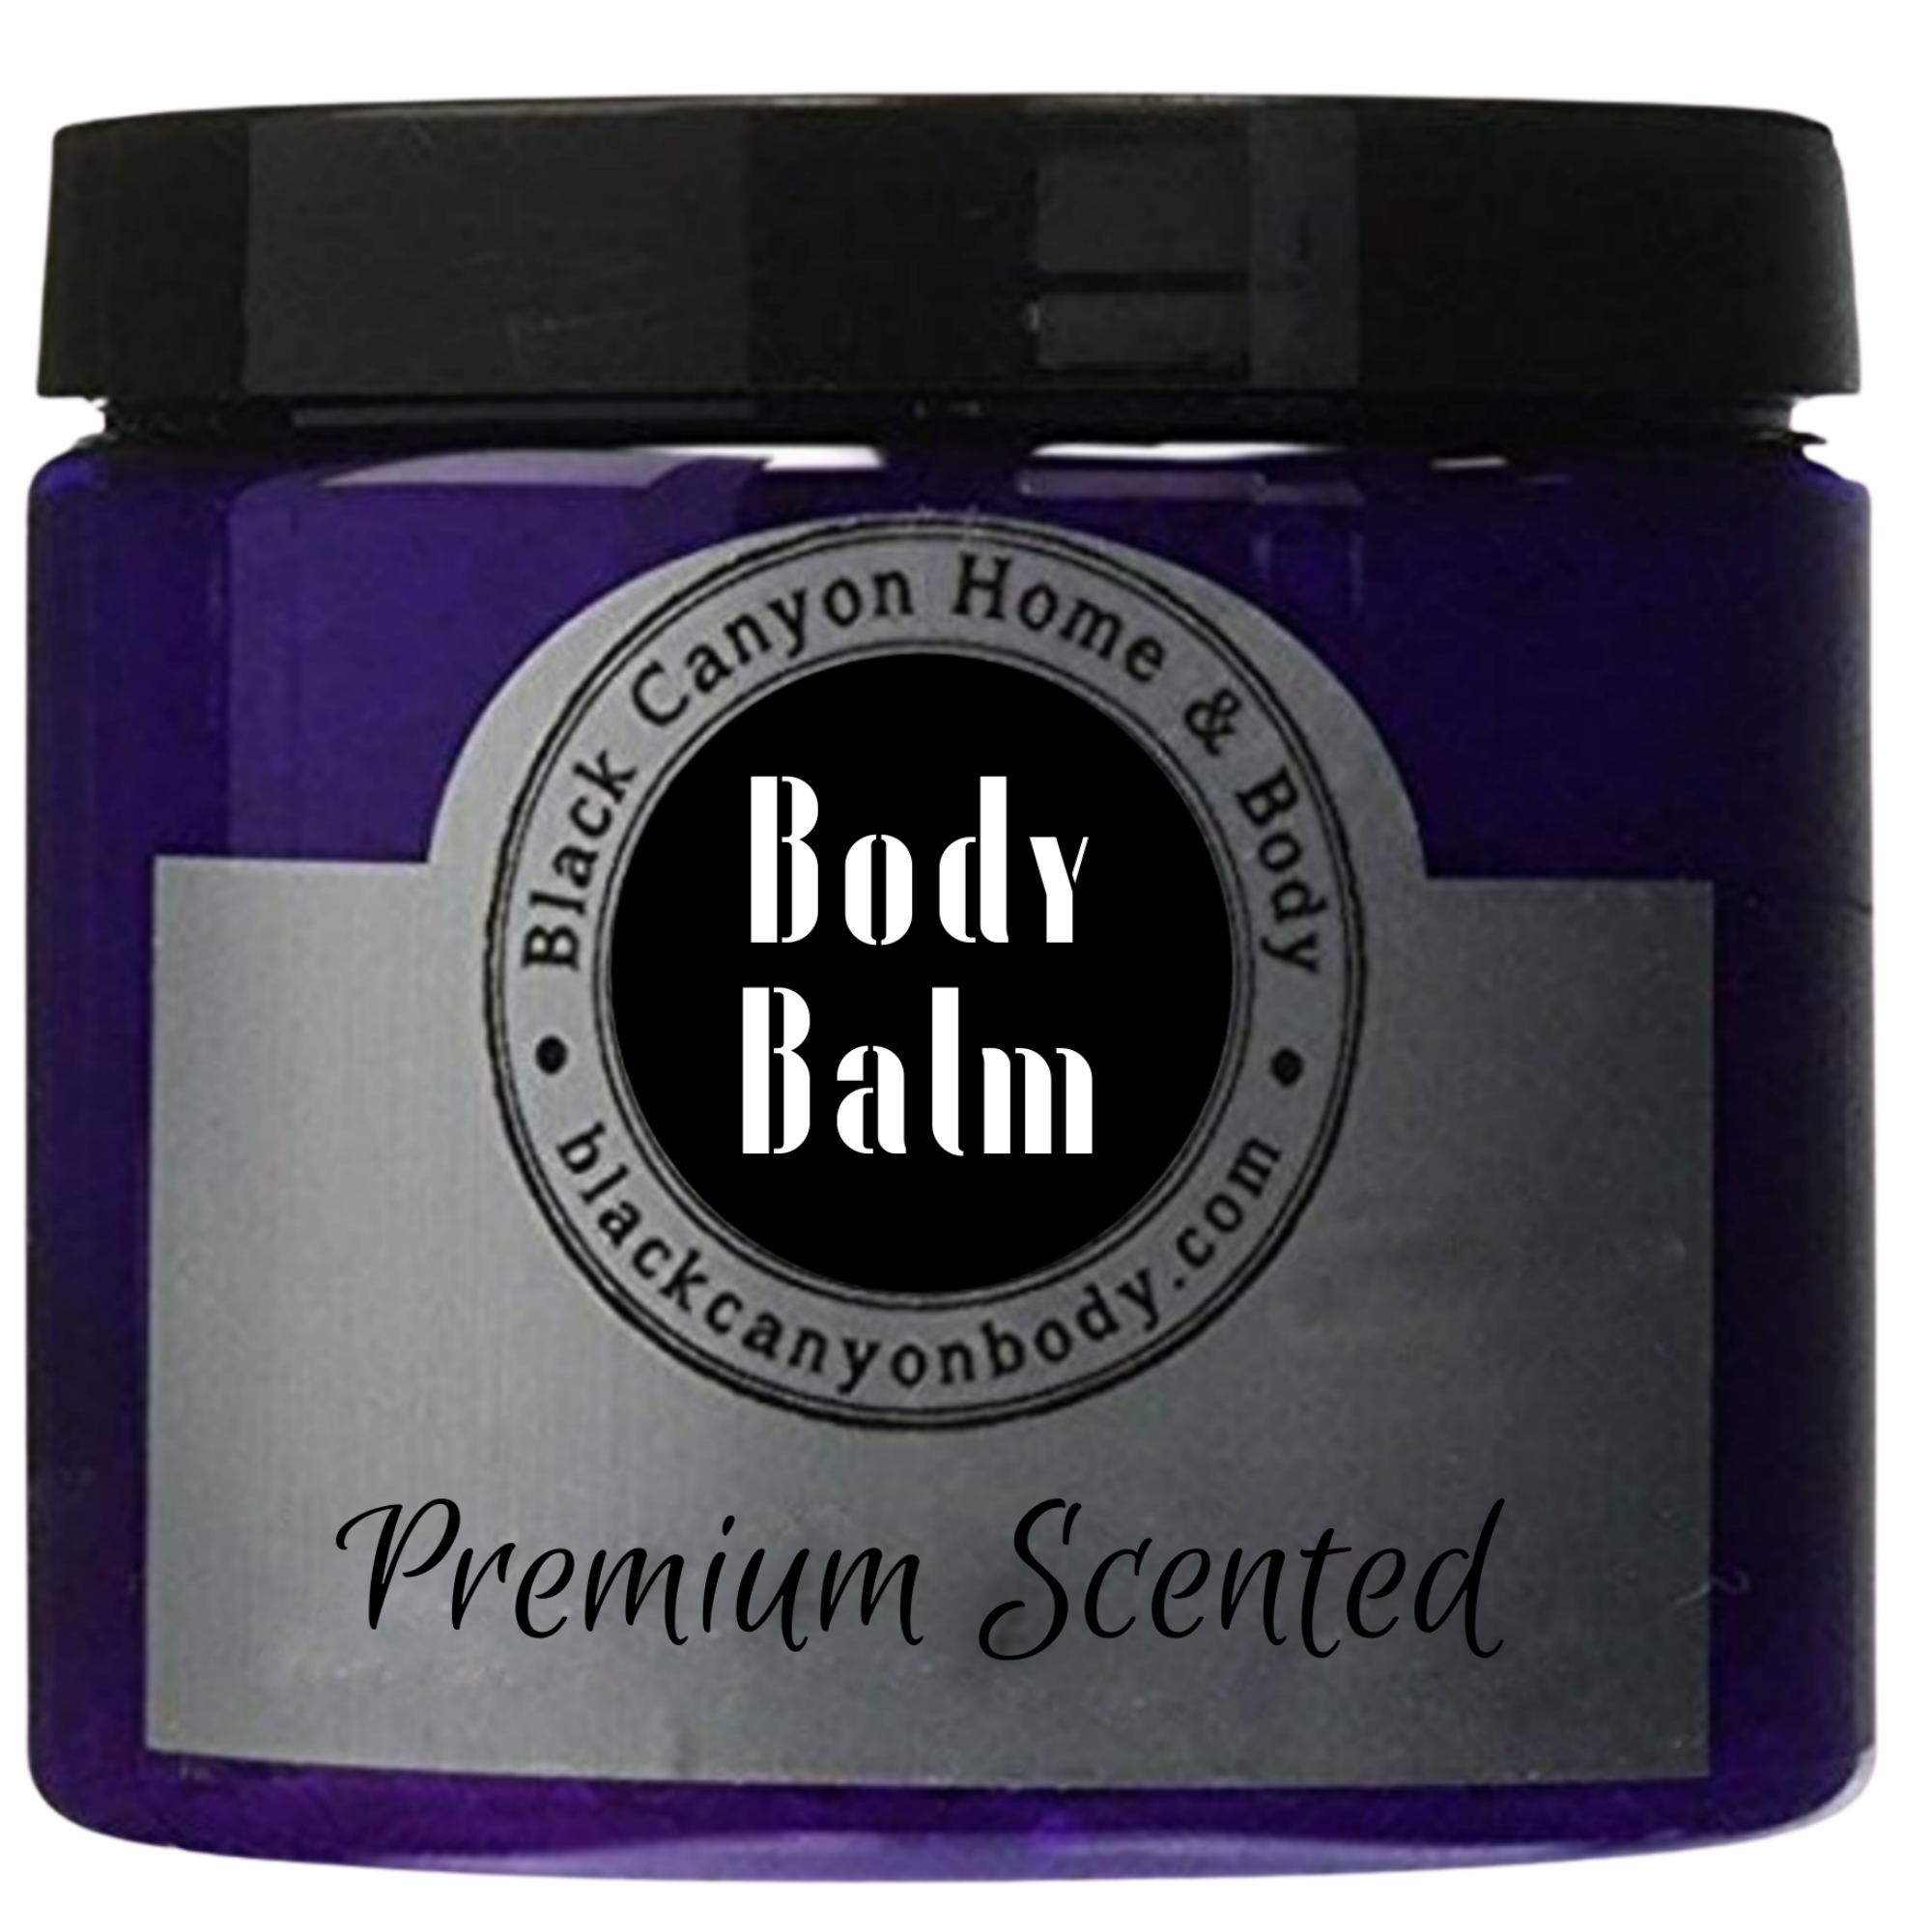 Paydens Cobalt Sugared Lemon & Mint Scented Natural Body Balm with Shea For Men